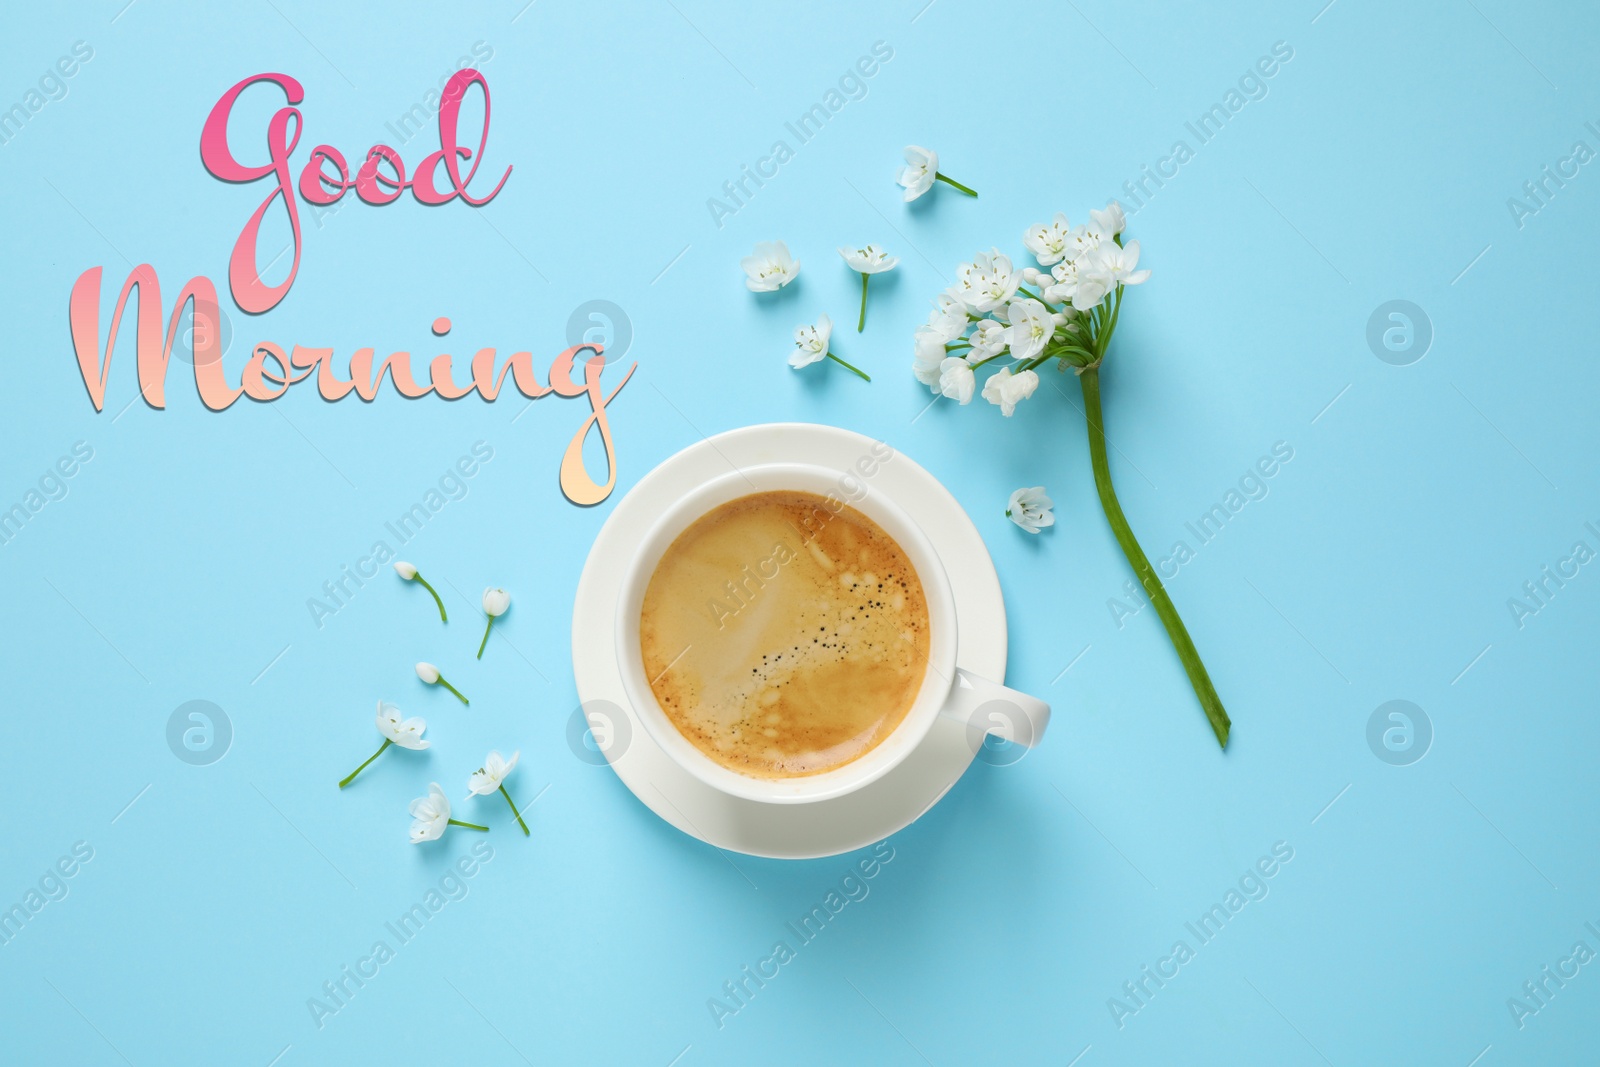 Image of White flowers and coffee on light blue background, flat lay. Good morning